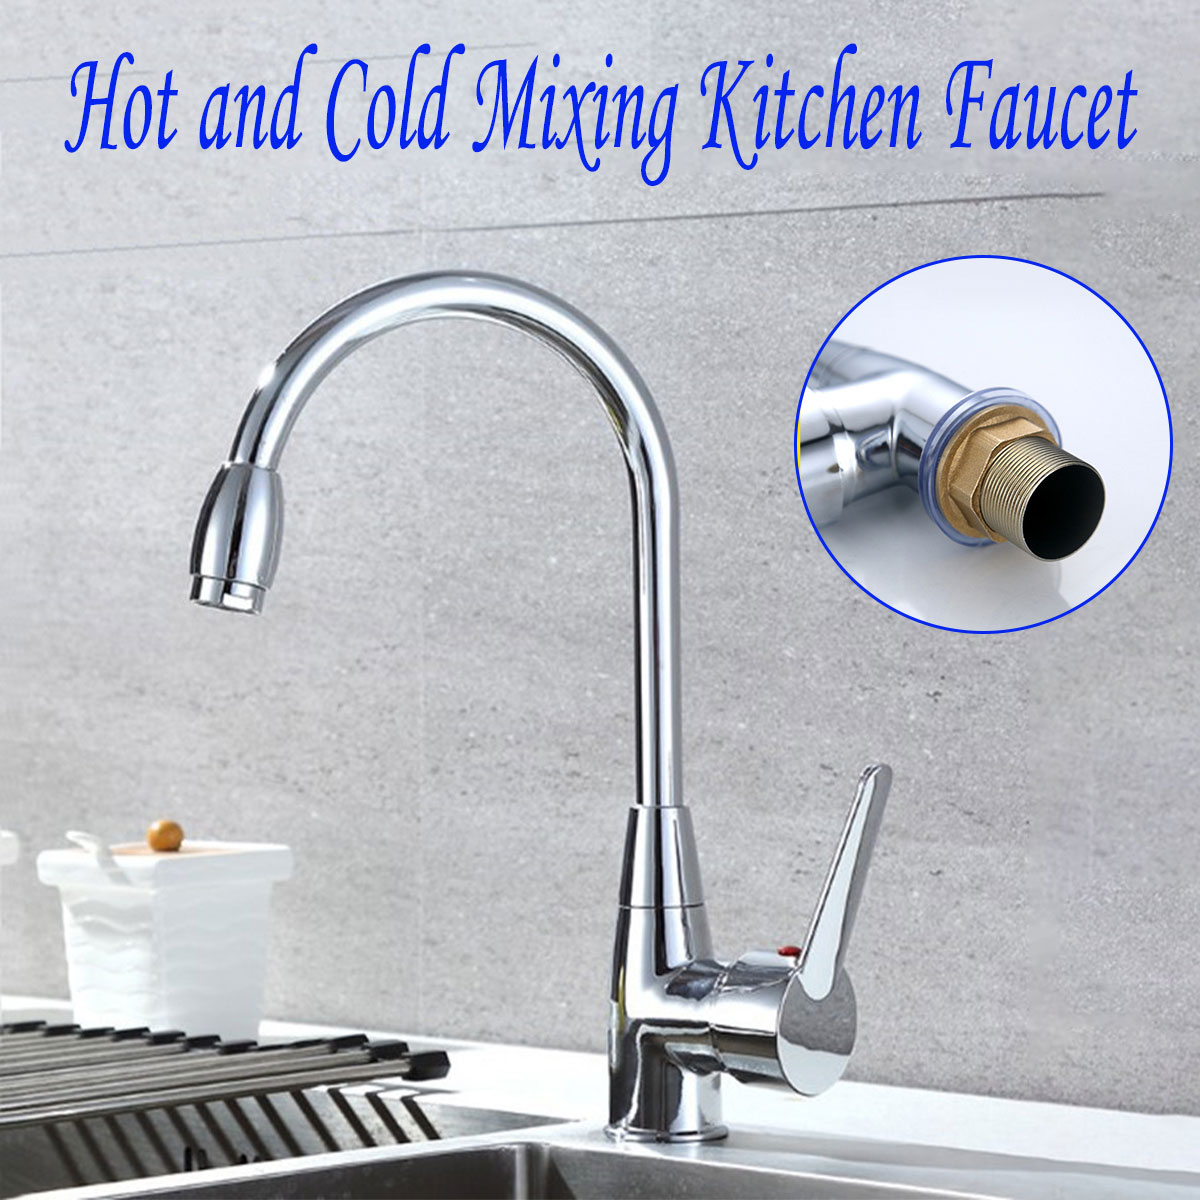 Kitchen Basin Sink Hot and Cold Mixing Chrome Faucet Taps Home Motorhome Camper